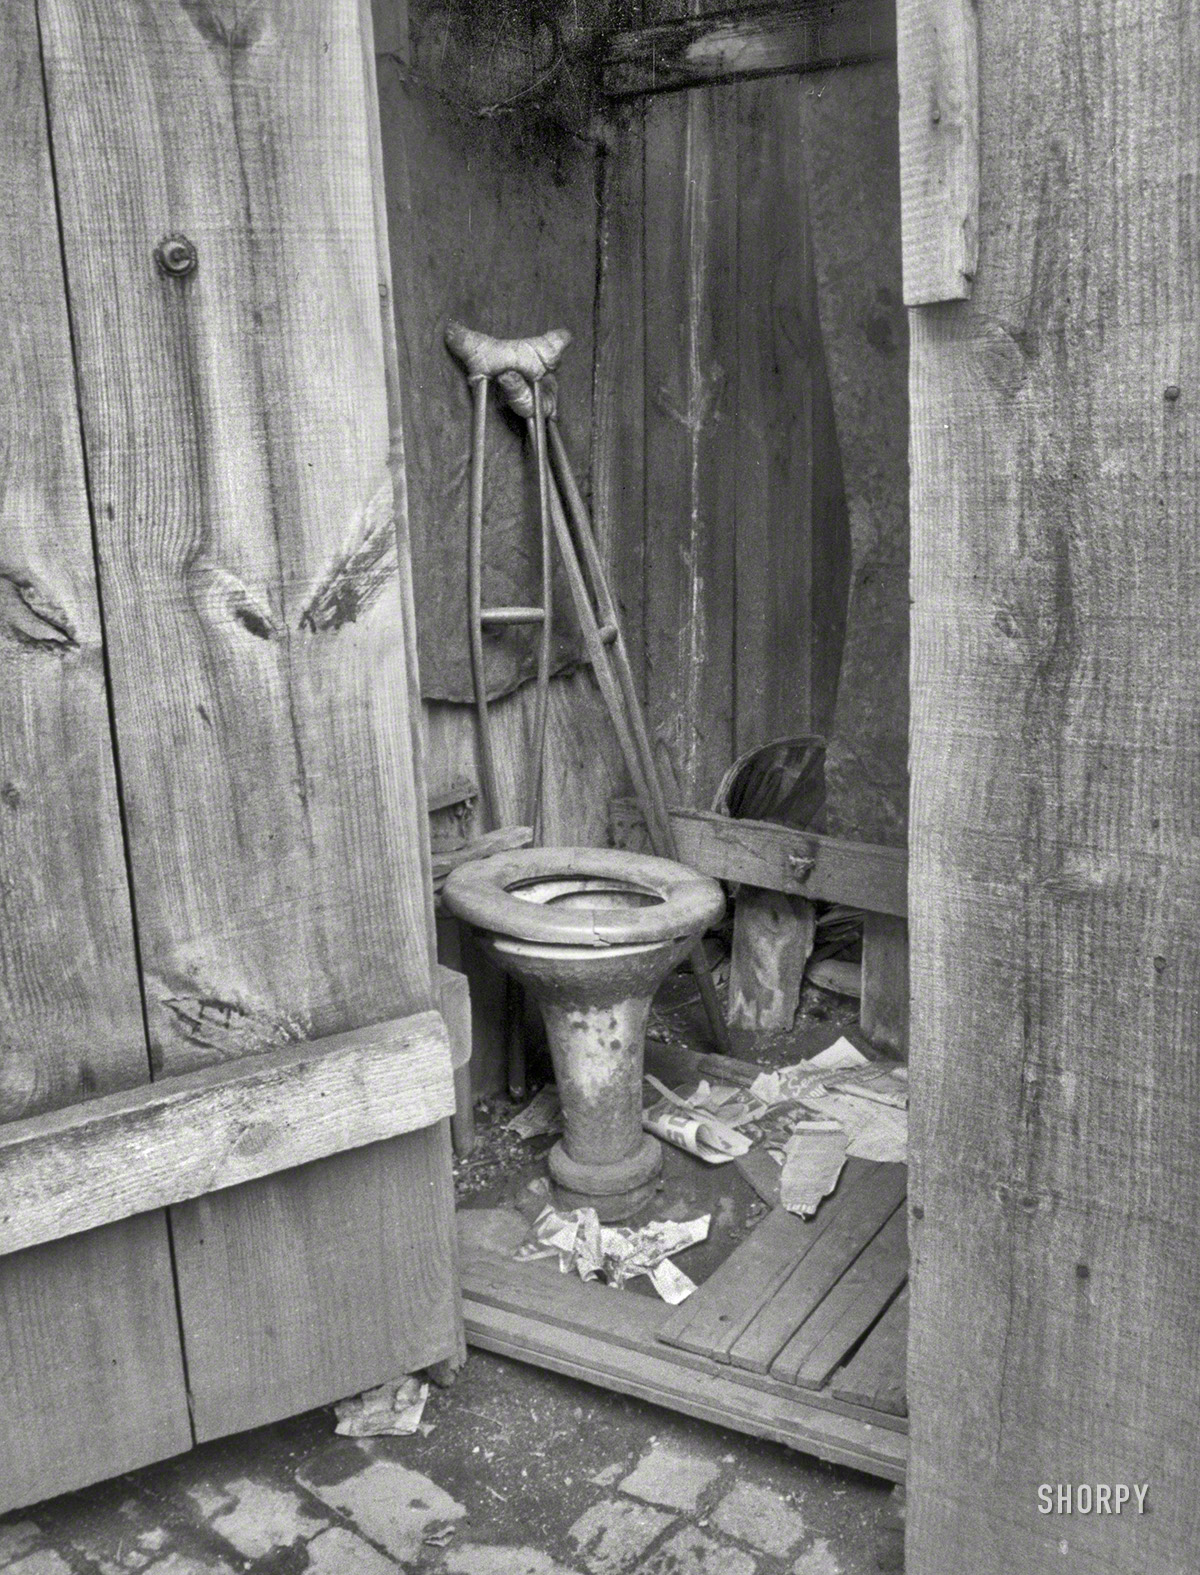 July 1935. "Negro slum privy, Washington, D.C. Within a few hundred yards of the new House Office Building is a row of these unkempt privies." 35mm nitrate negative by Carl Mydans for the Resettlement Administration. View full size.